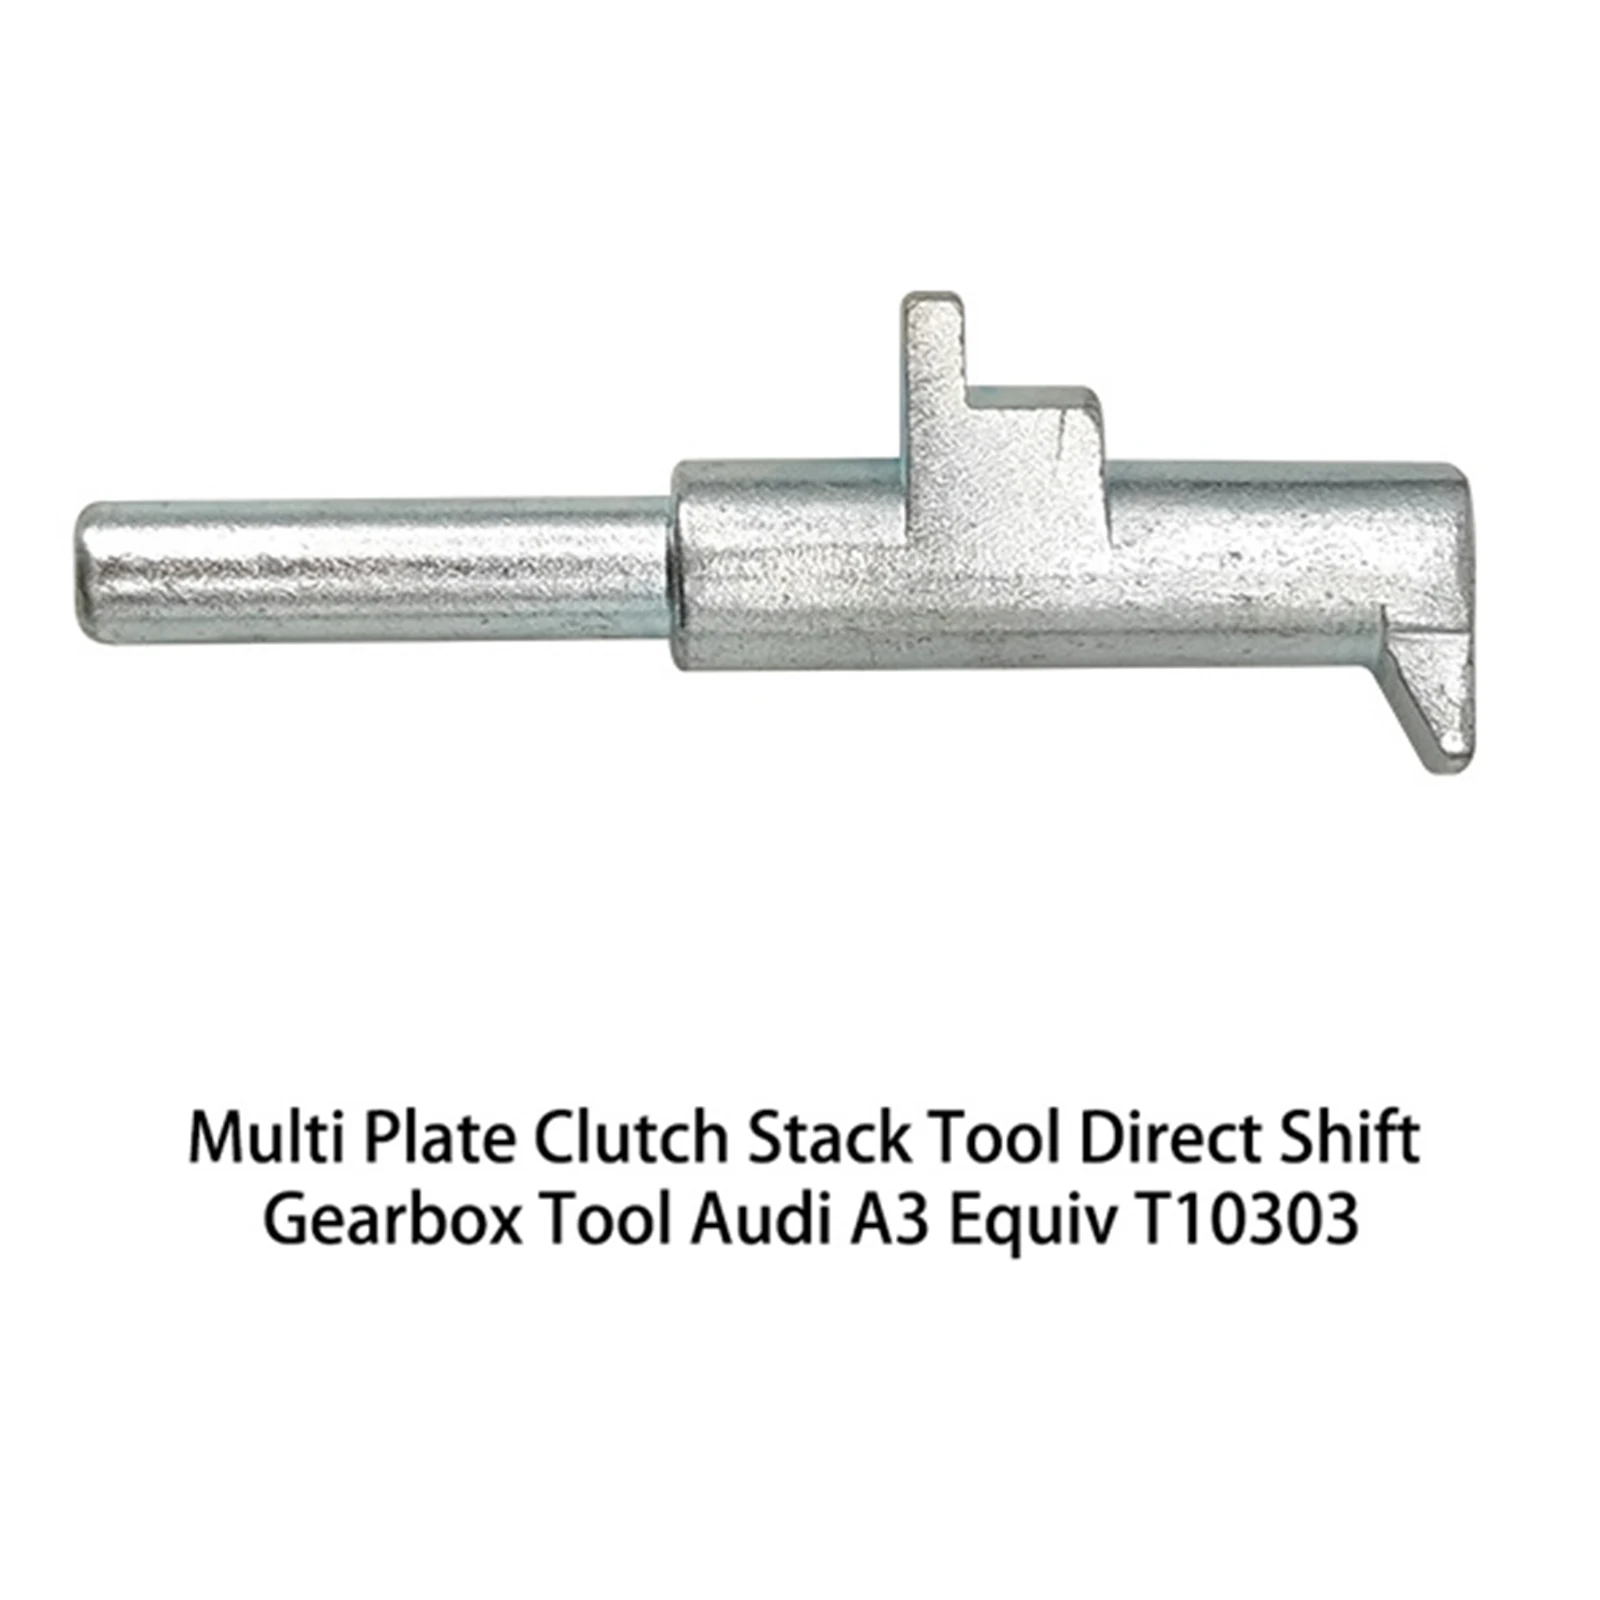 Multi Plate Clutch Stack Tool Clutch Retaining Replacement for Audi A3 Equiv T10303